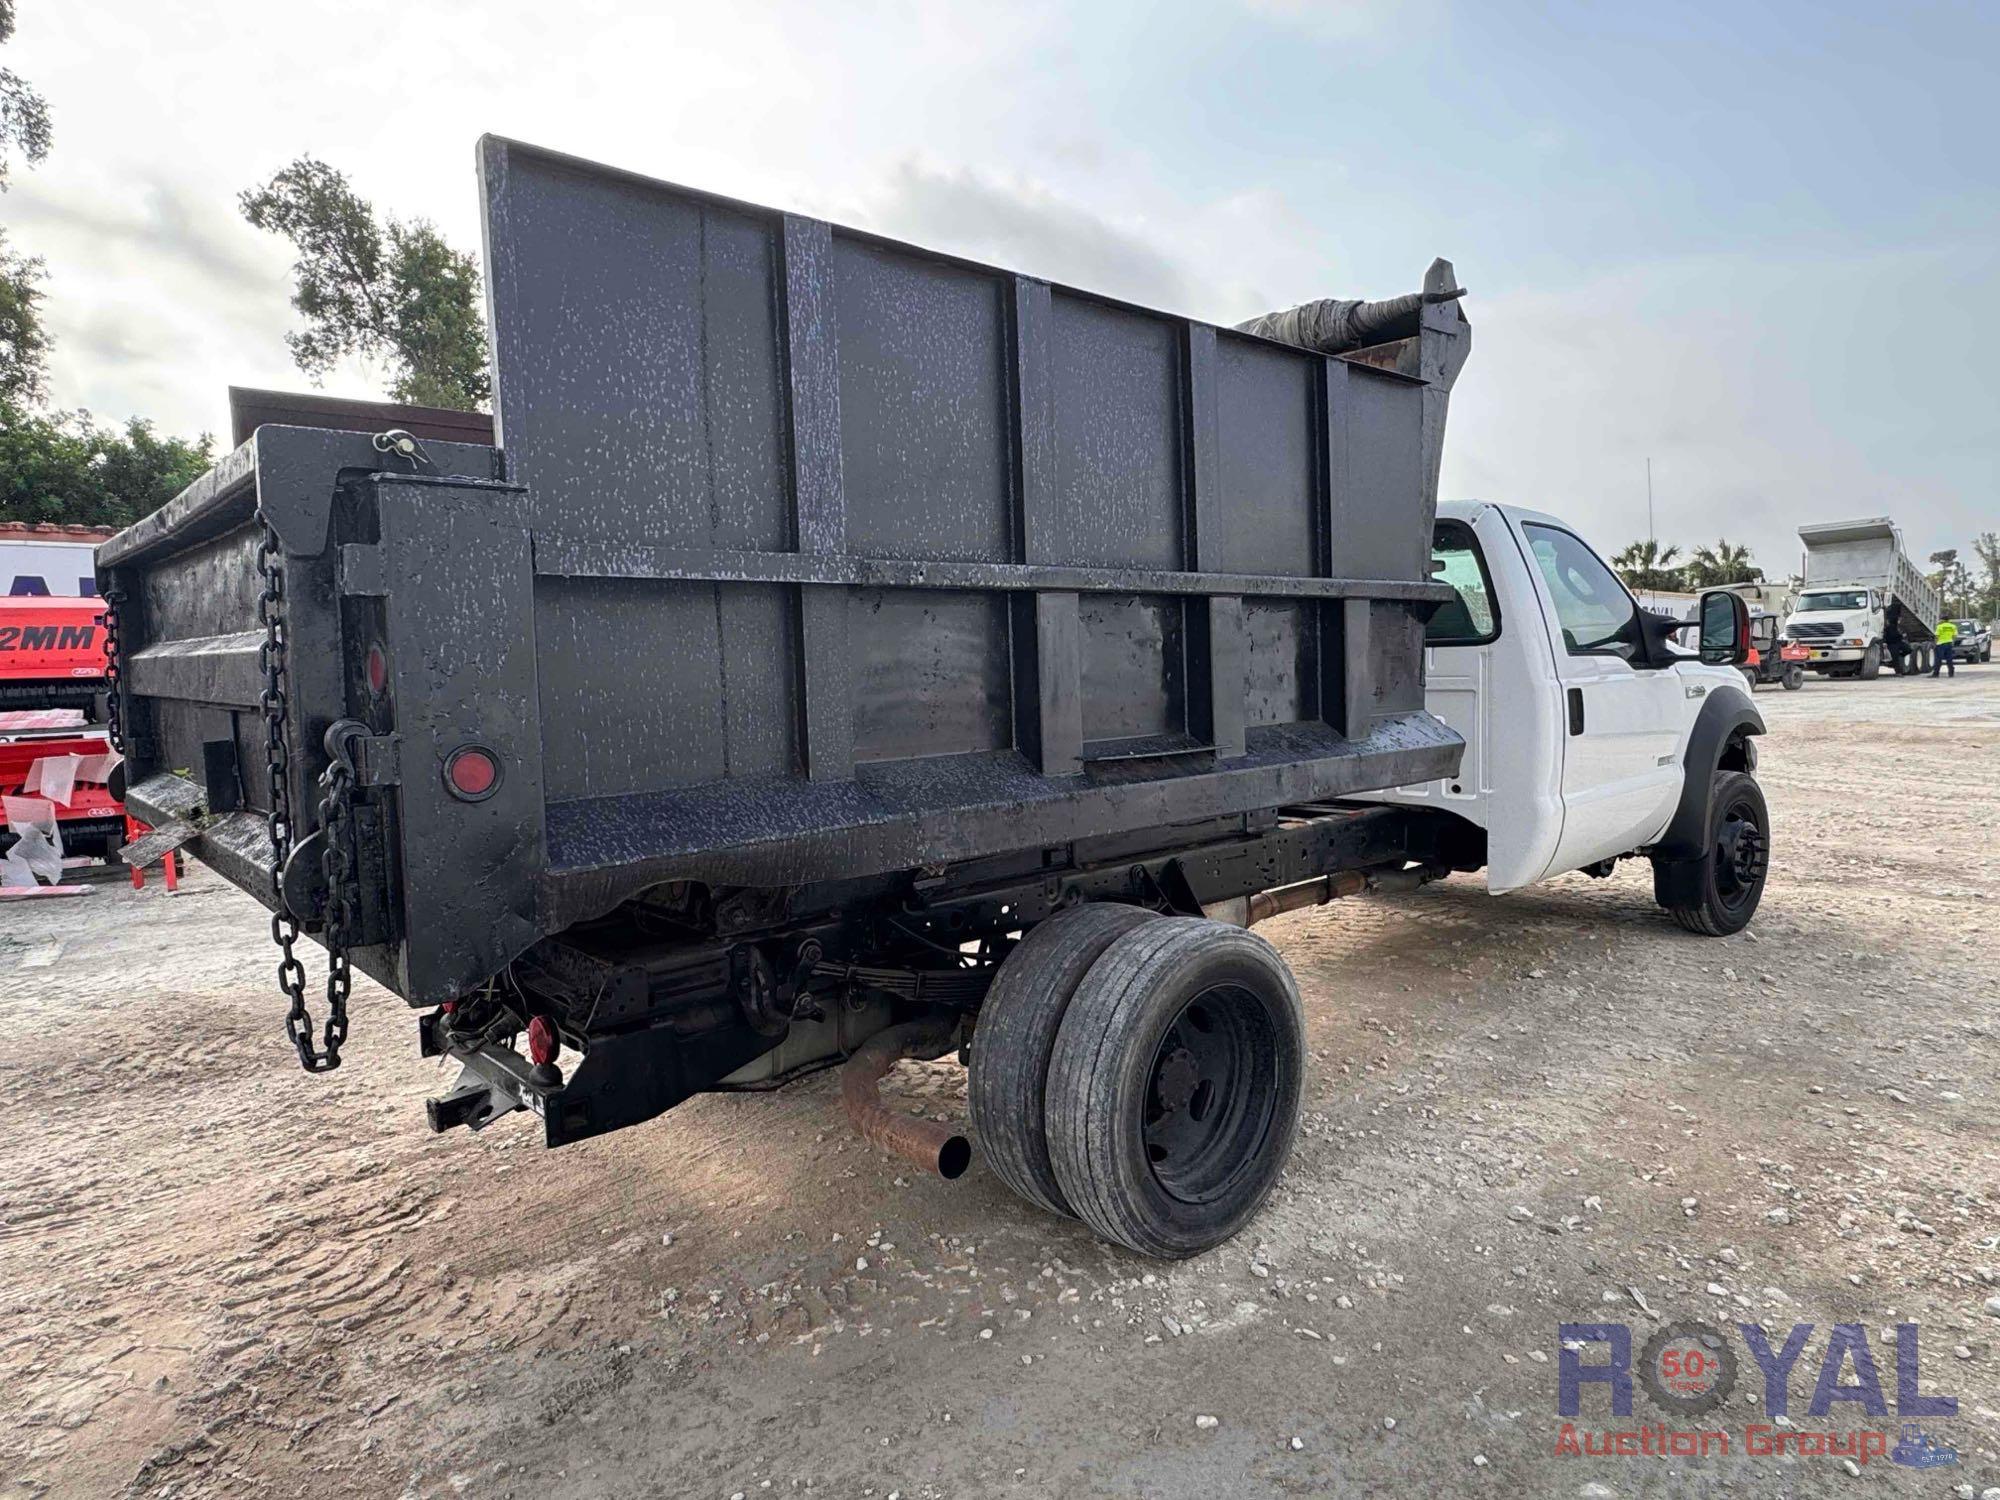 2006 Ford F450 S/A Dump Truck